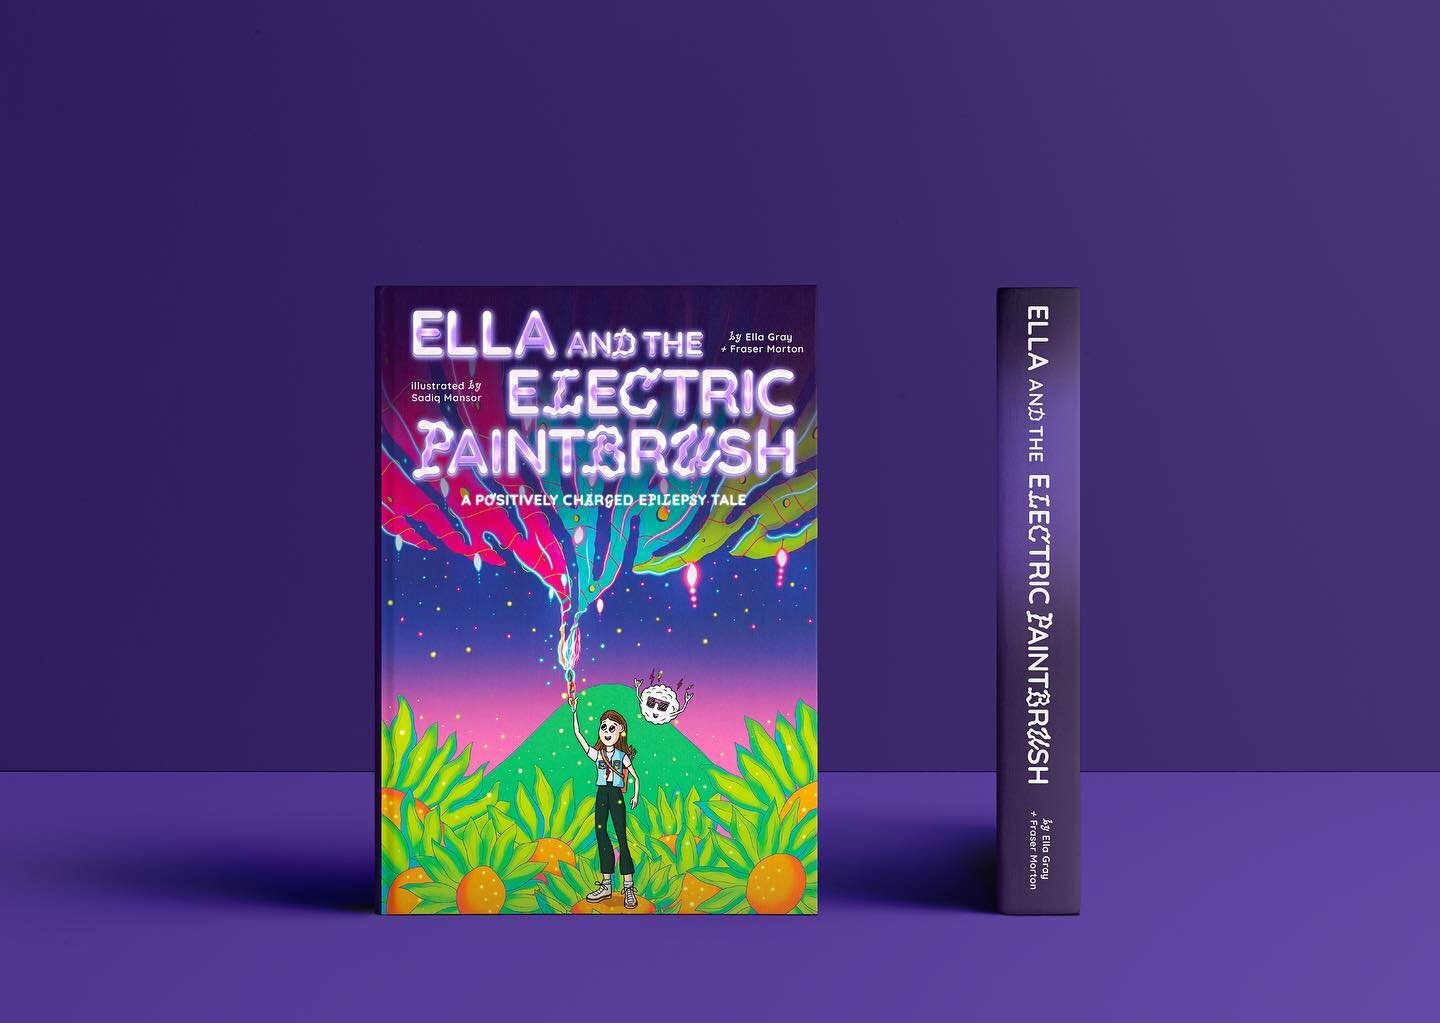 Hey world! Here&rsquo;s a sneak peek of our new book Ella And The Electric Paintbrush, A Positively Charged Epilepsy Tale. 

We're excited to publish this new fictional book for young adult readers (and their parents). It will be available imminently